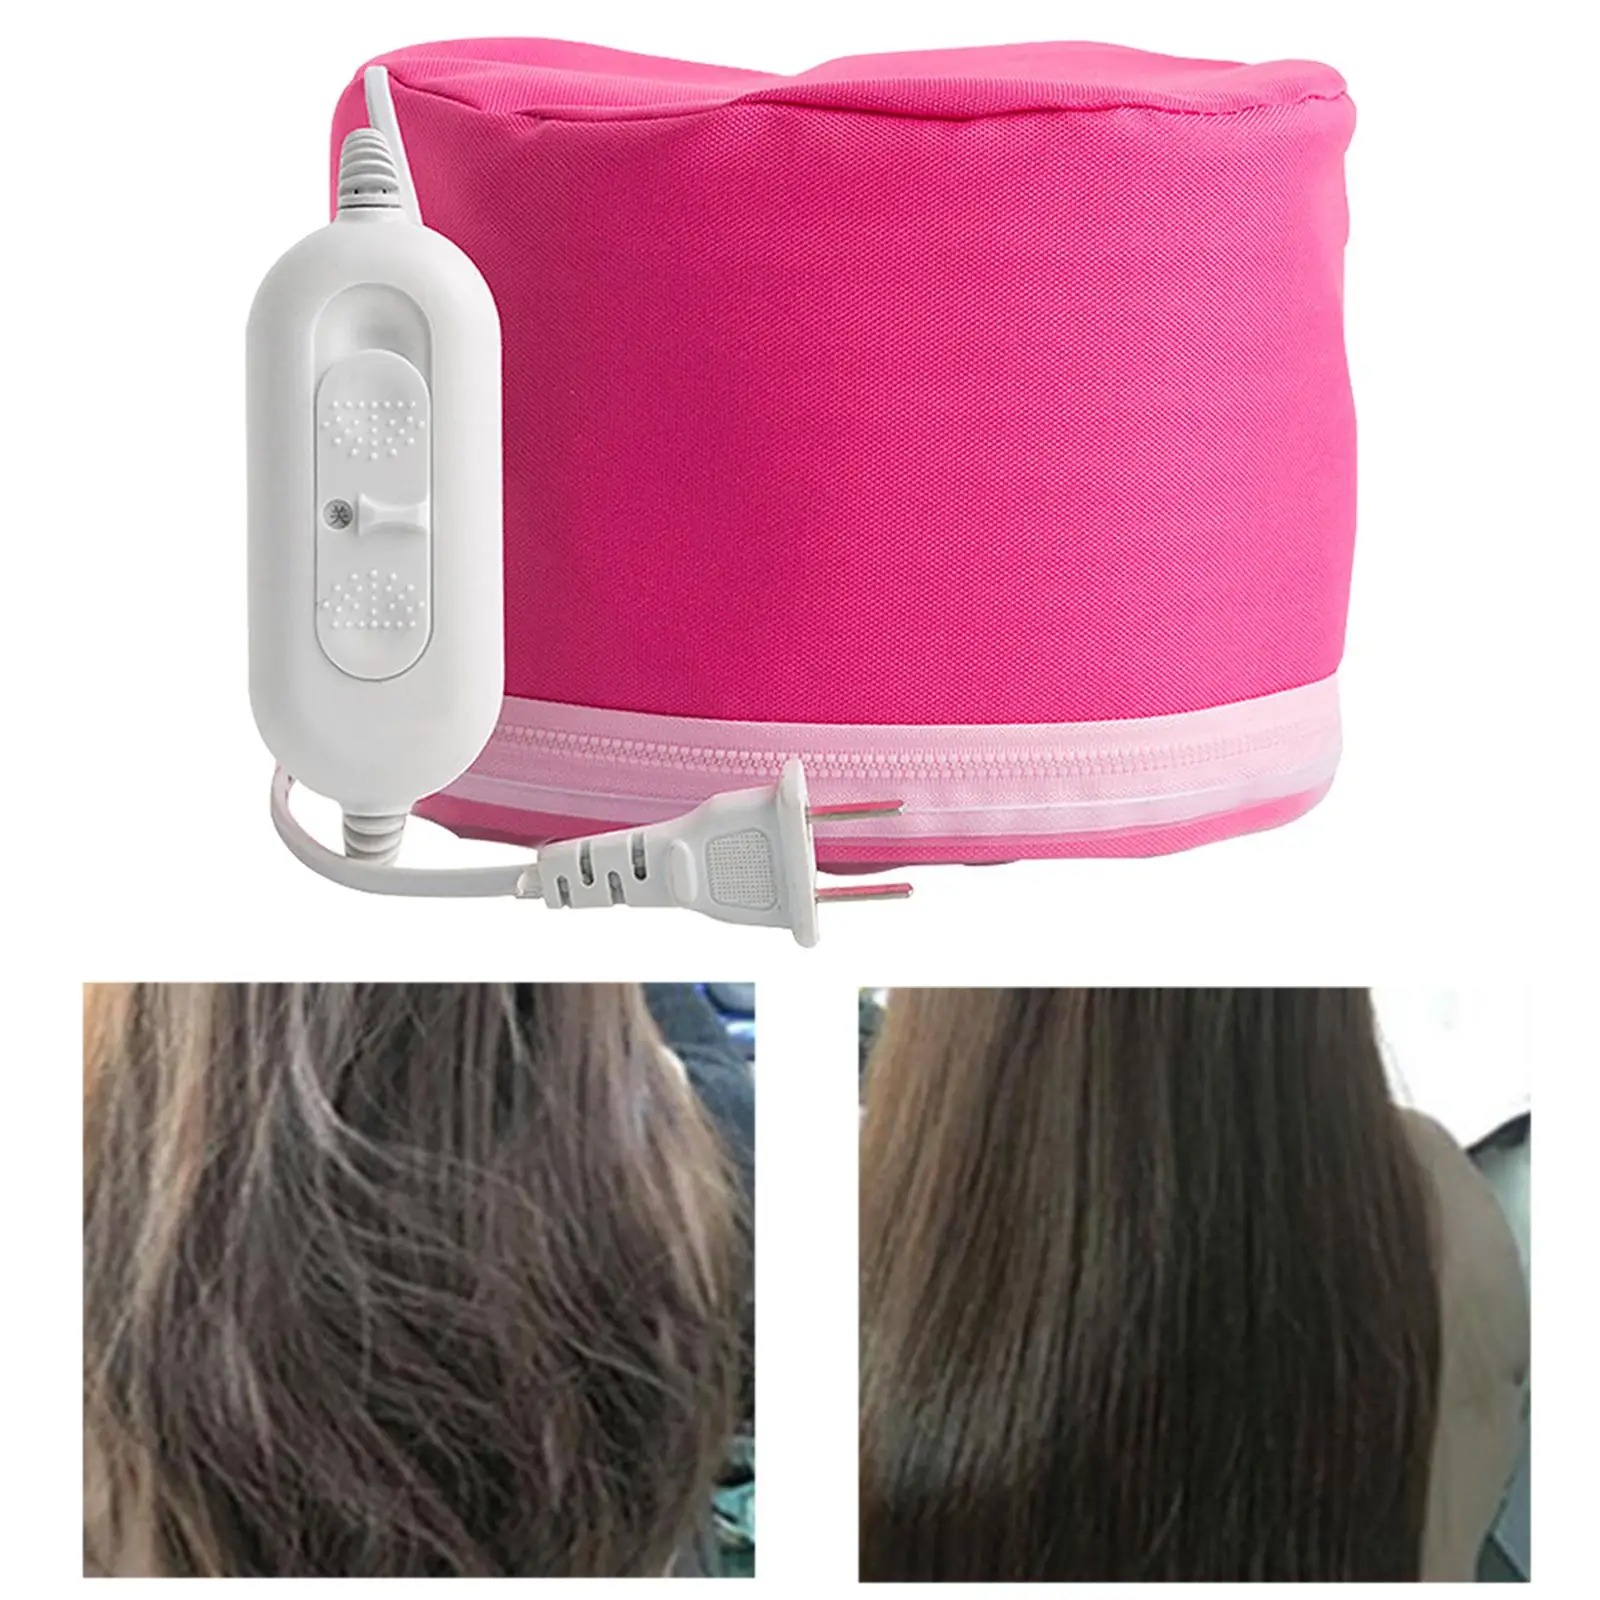 Hair Heating Caps Steamer 3-Mode Adjustable Size with Zipper Essential Oil Caps for Deep Conditioning Salon Natural Hair Nursing